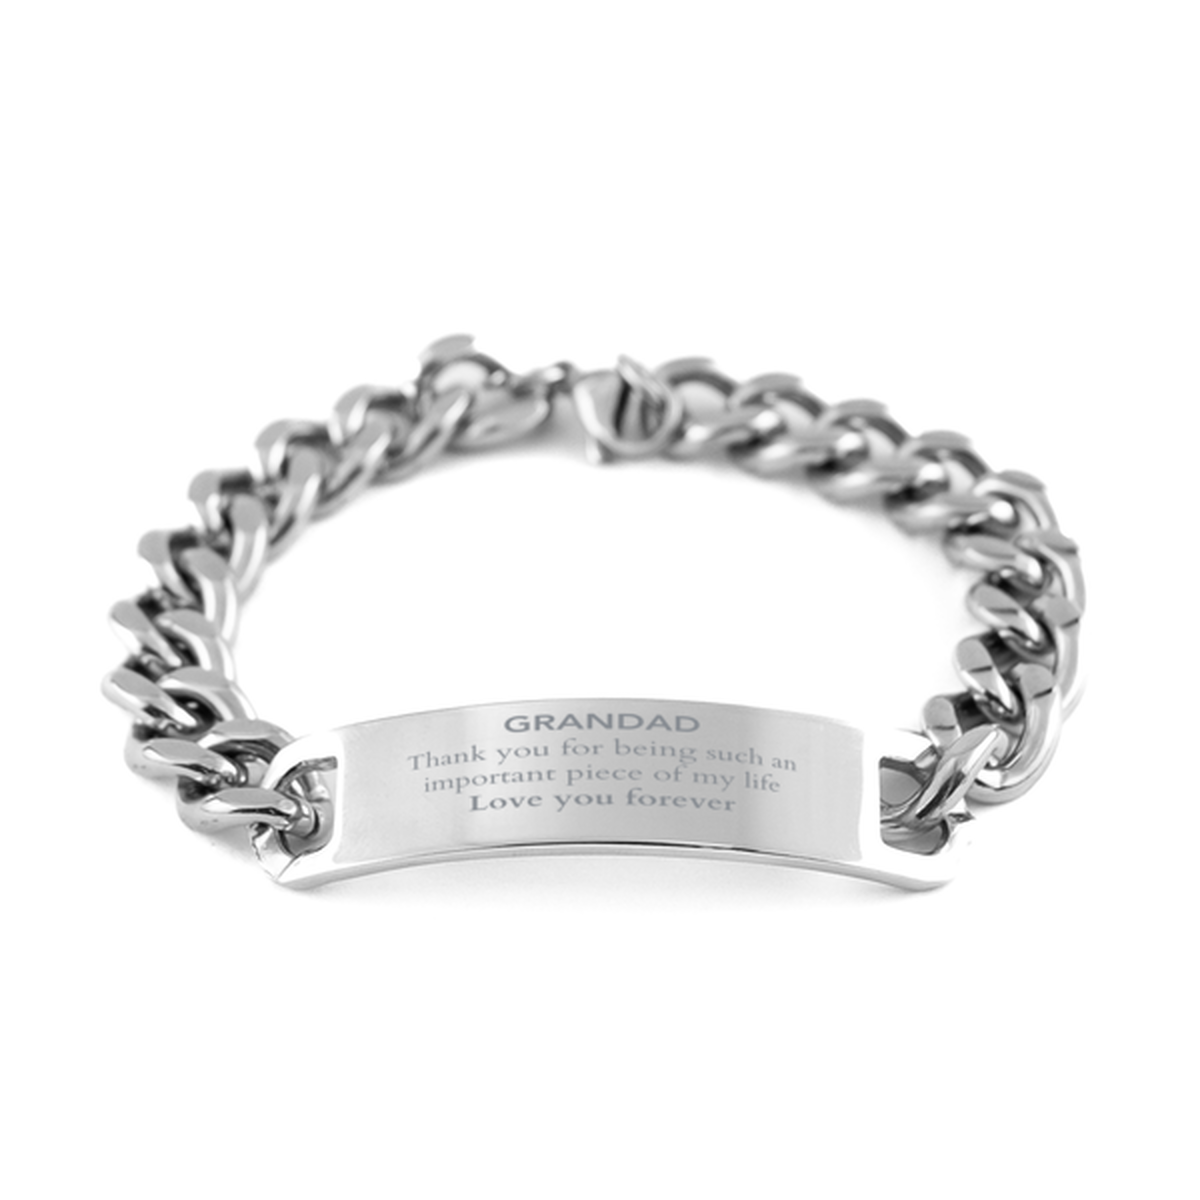 Appropriate Grandad Cuban Chain Stainless Steel Bracelet Epic Birthday Gifts for Grandad Thank you for being such an important piece of my life Grandad Christmas Mothers Fathers Day